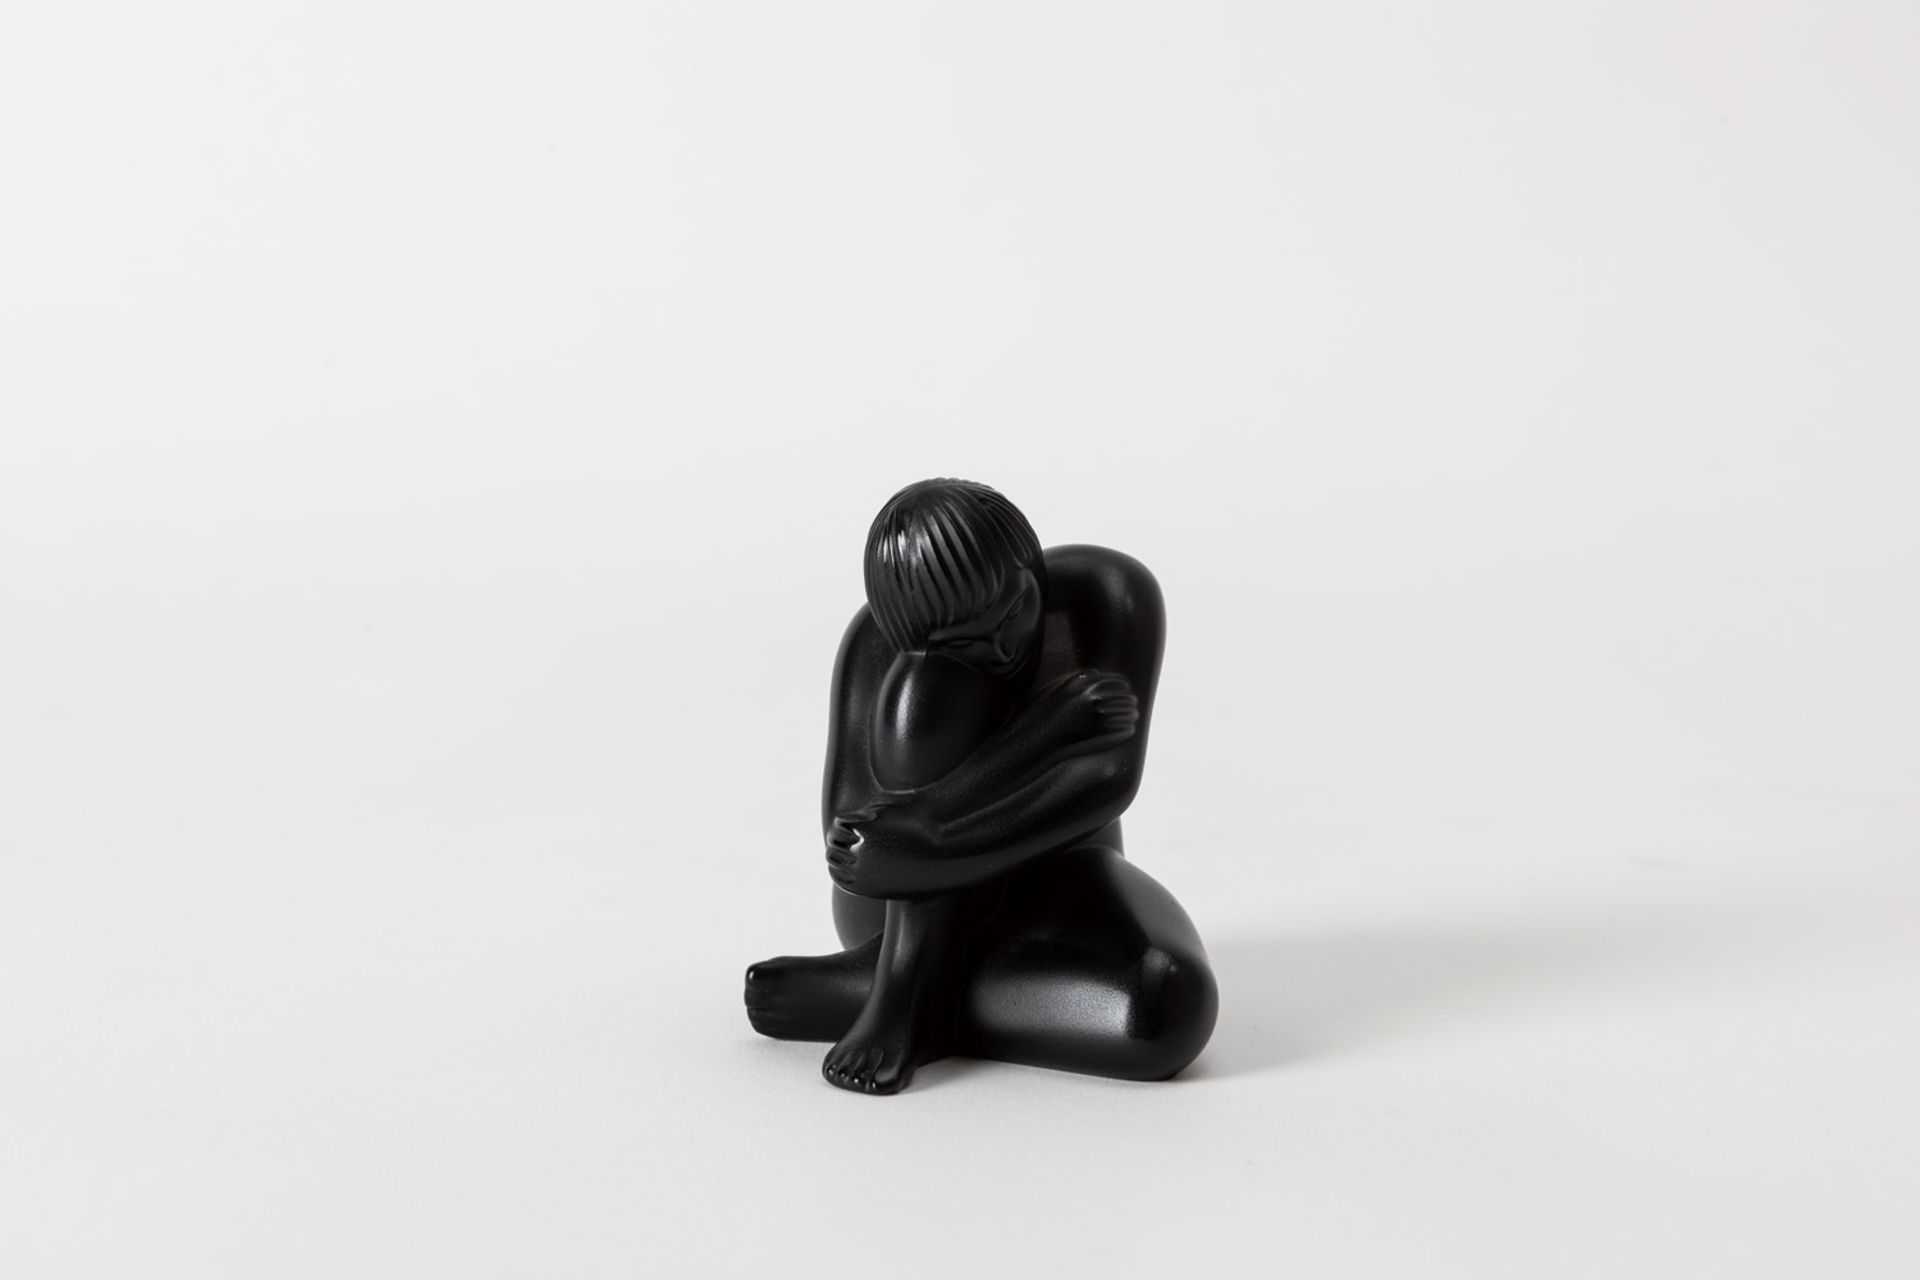 Lalique - Small sculpture - Image 2 of 2